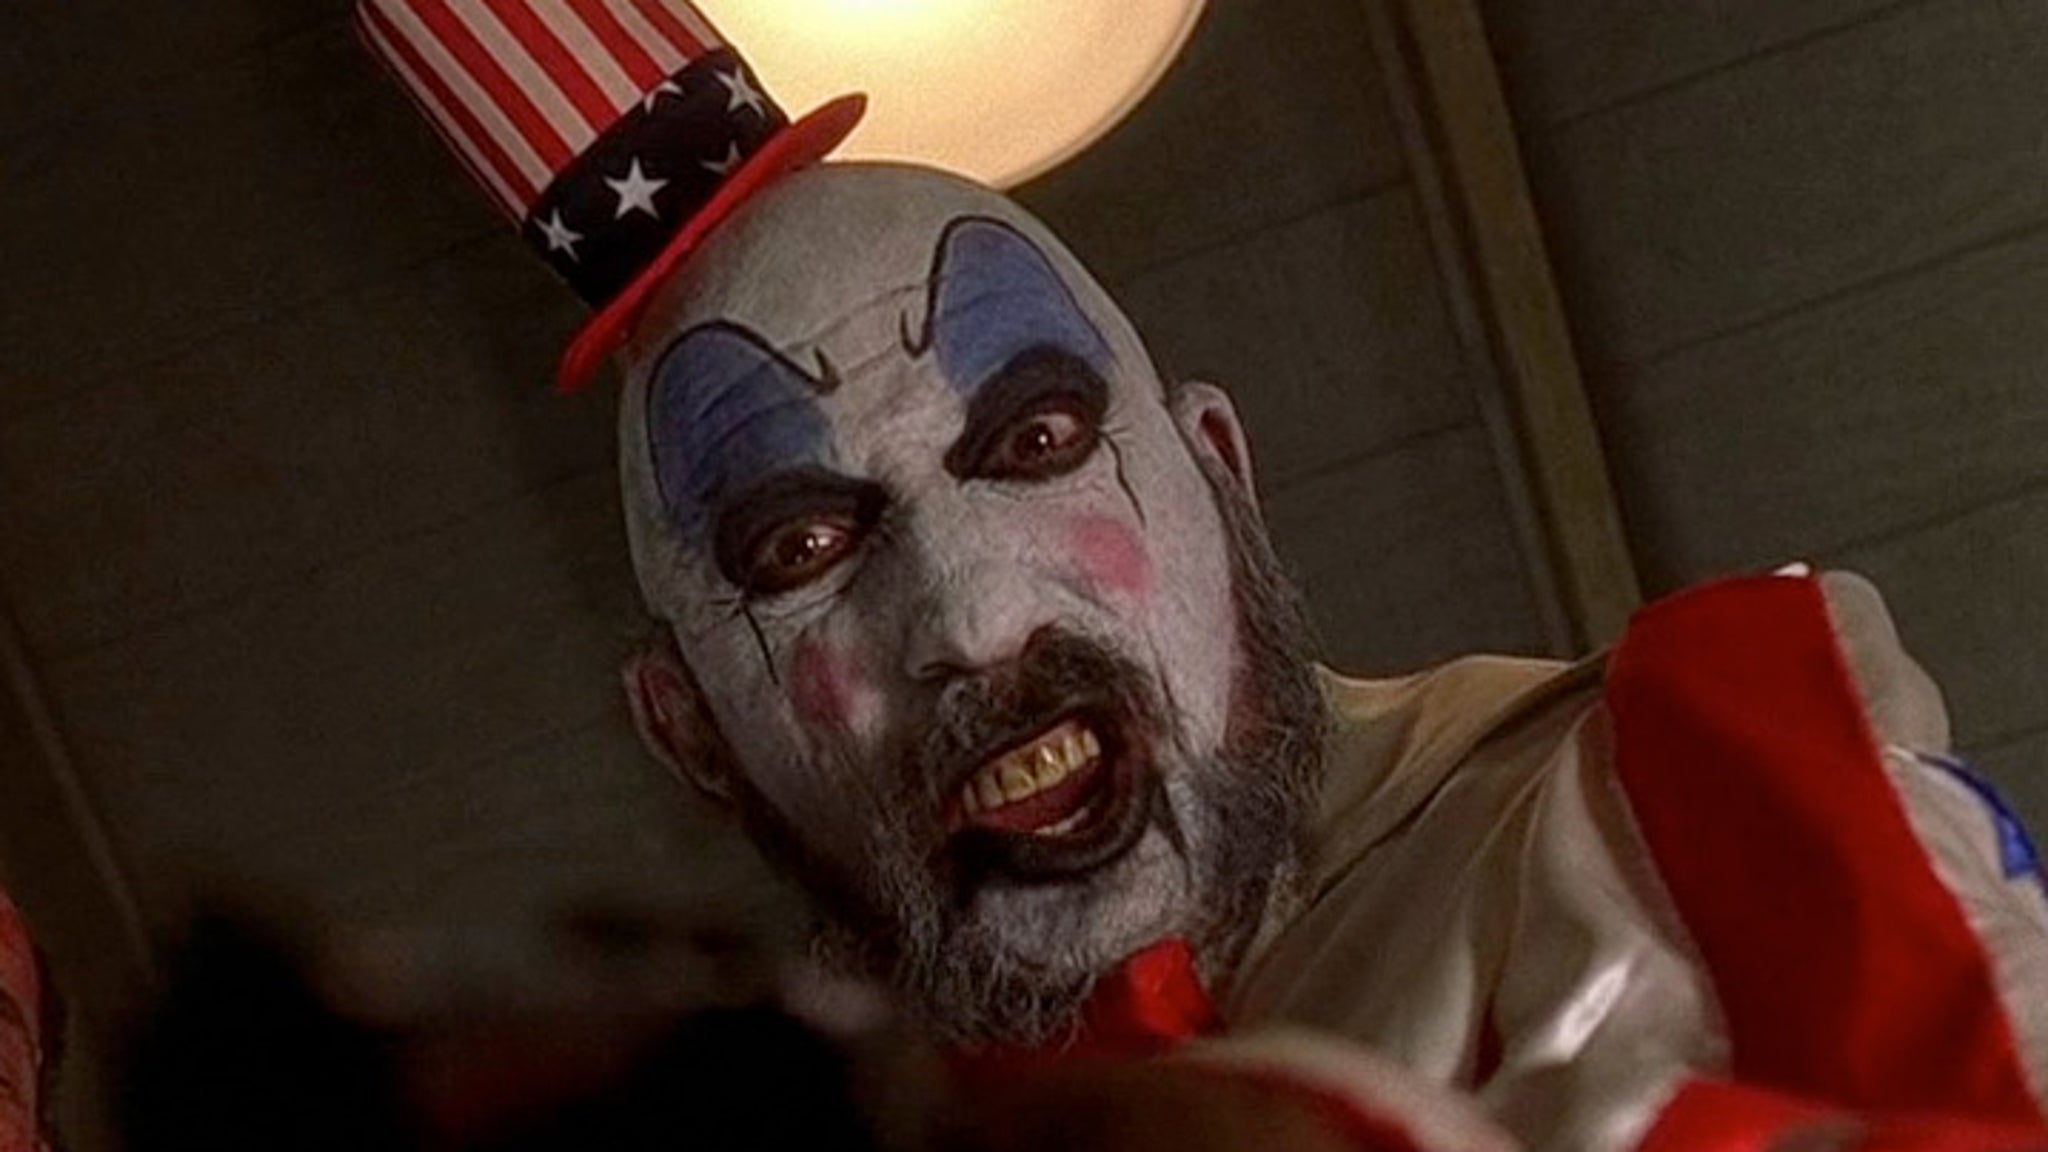 Sid Haig Signed House of 1000 Corpses 11x17 Photo Inscribed Captain  Spaulding Legends COA  Pristine Auction